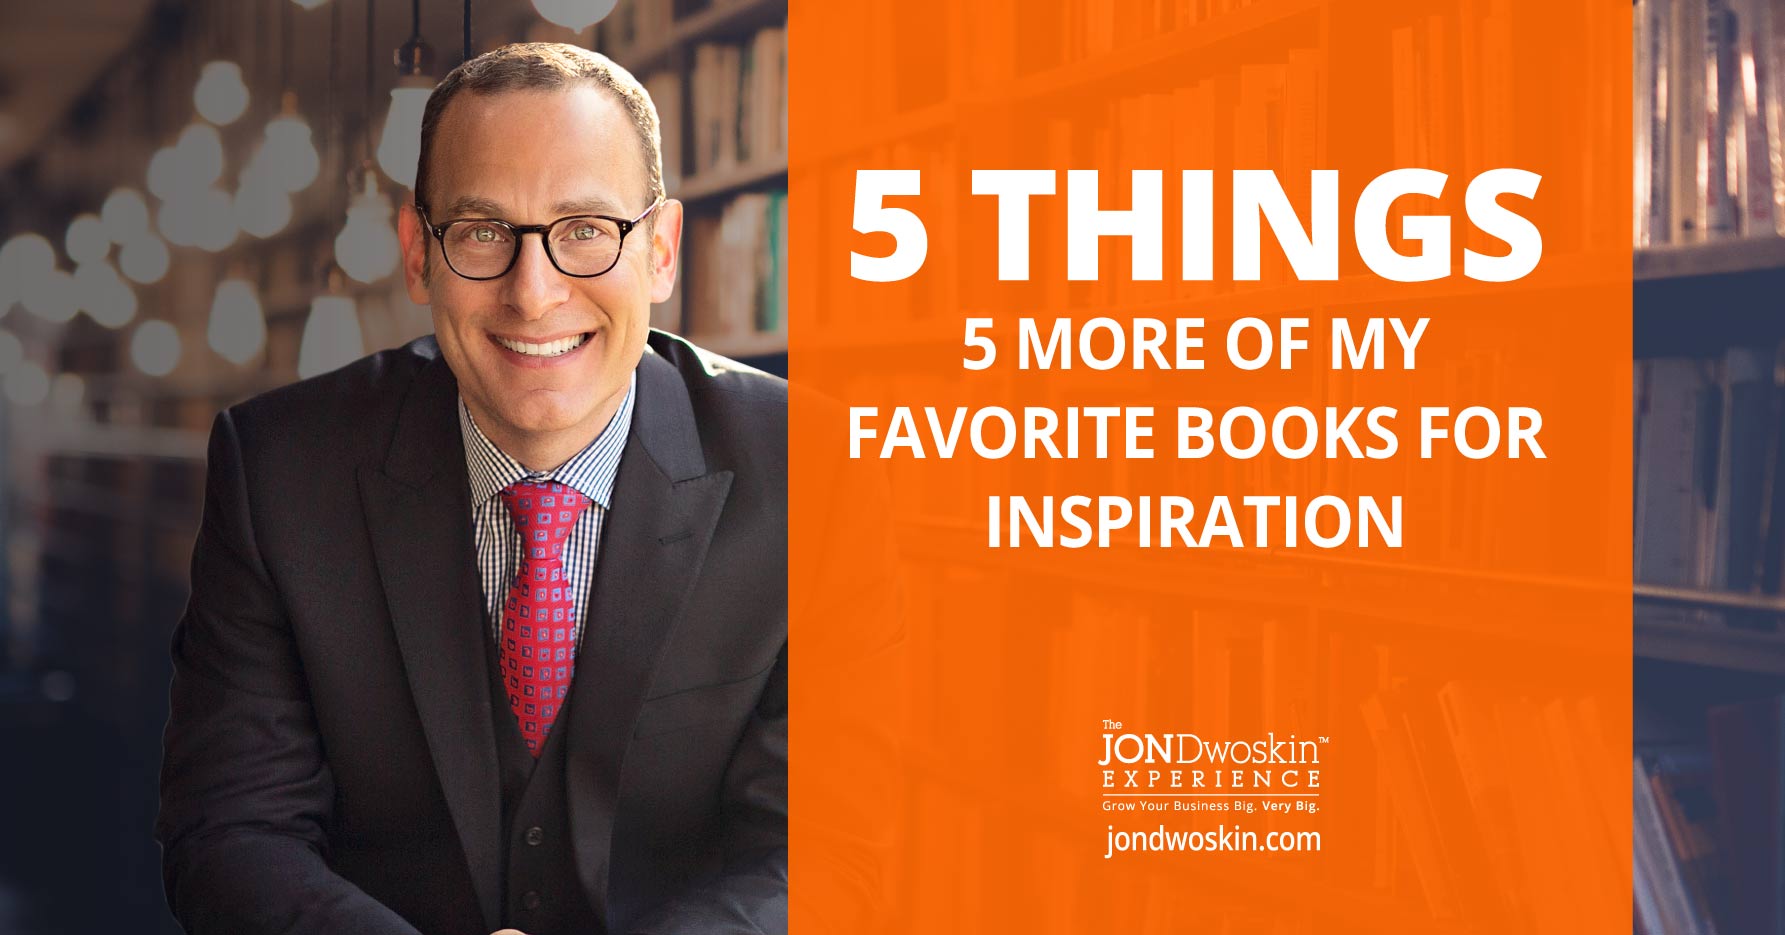 5 More of My Favorite Books for Inspiration